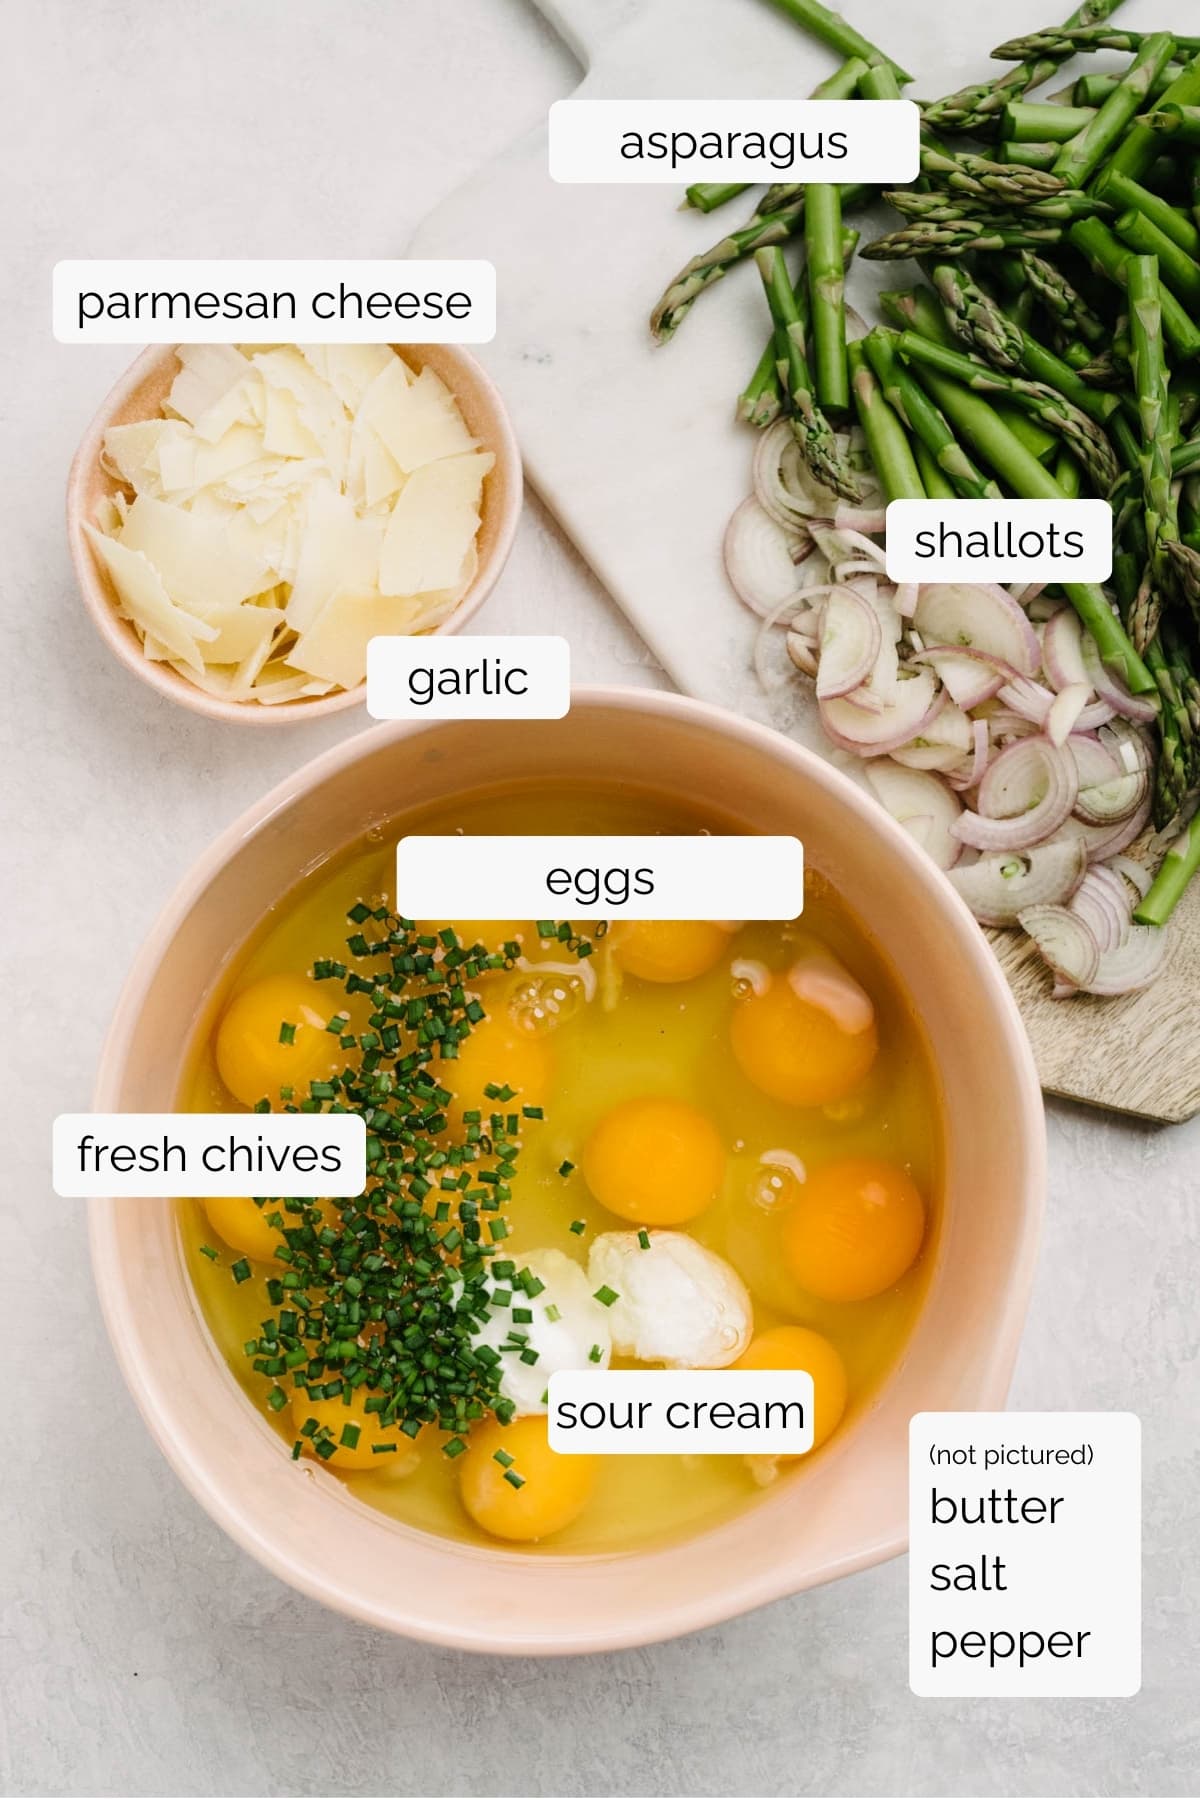 The ingredients for an asparagus frittata arranged on a concrete background - eggs, fresh chives, and sour cream in a large mixing bowl; shaved parmesan cheese in a small bowl; chopped asparagus and thinly sliced shallots on a cutting board.